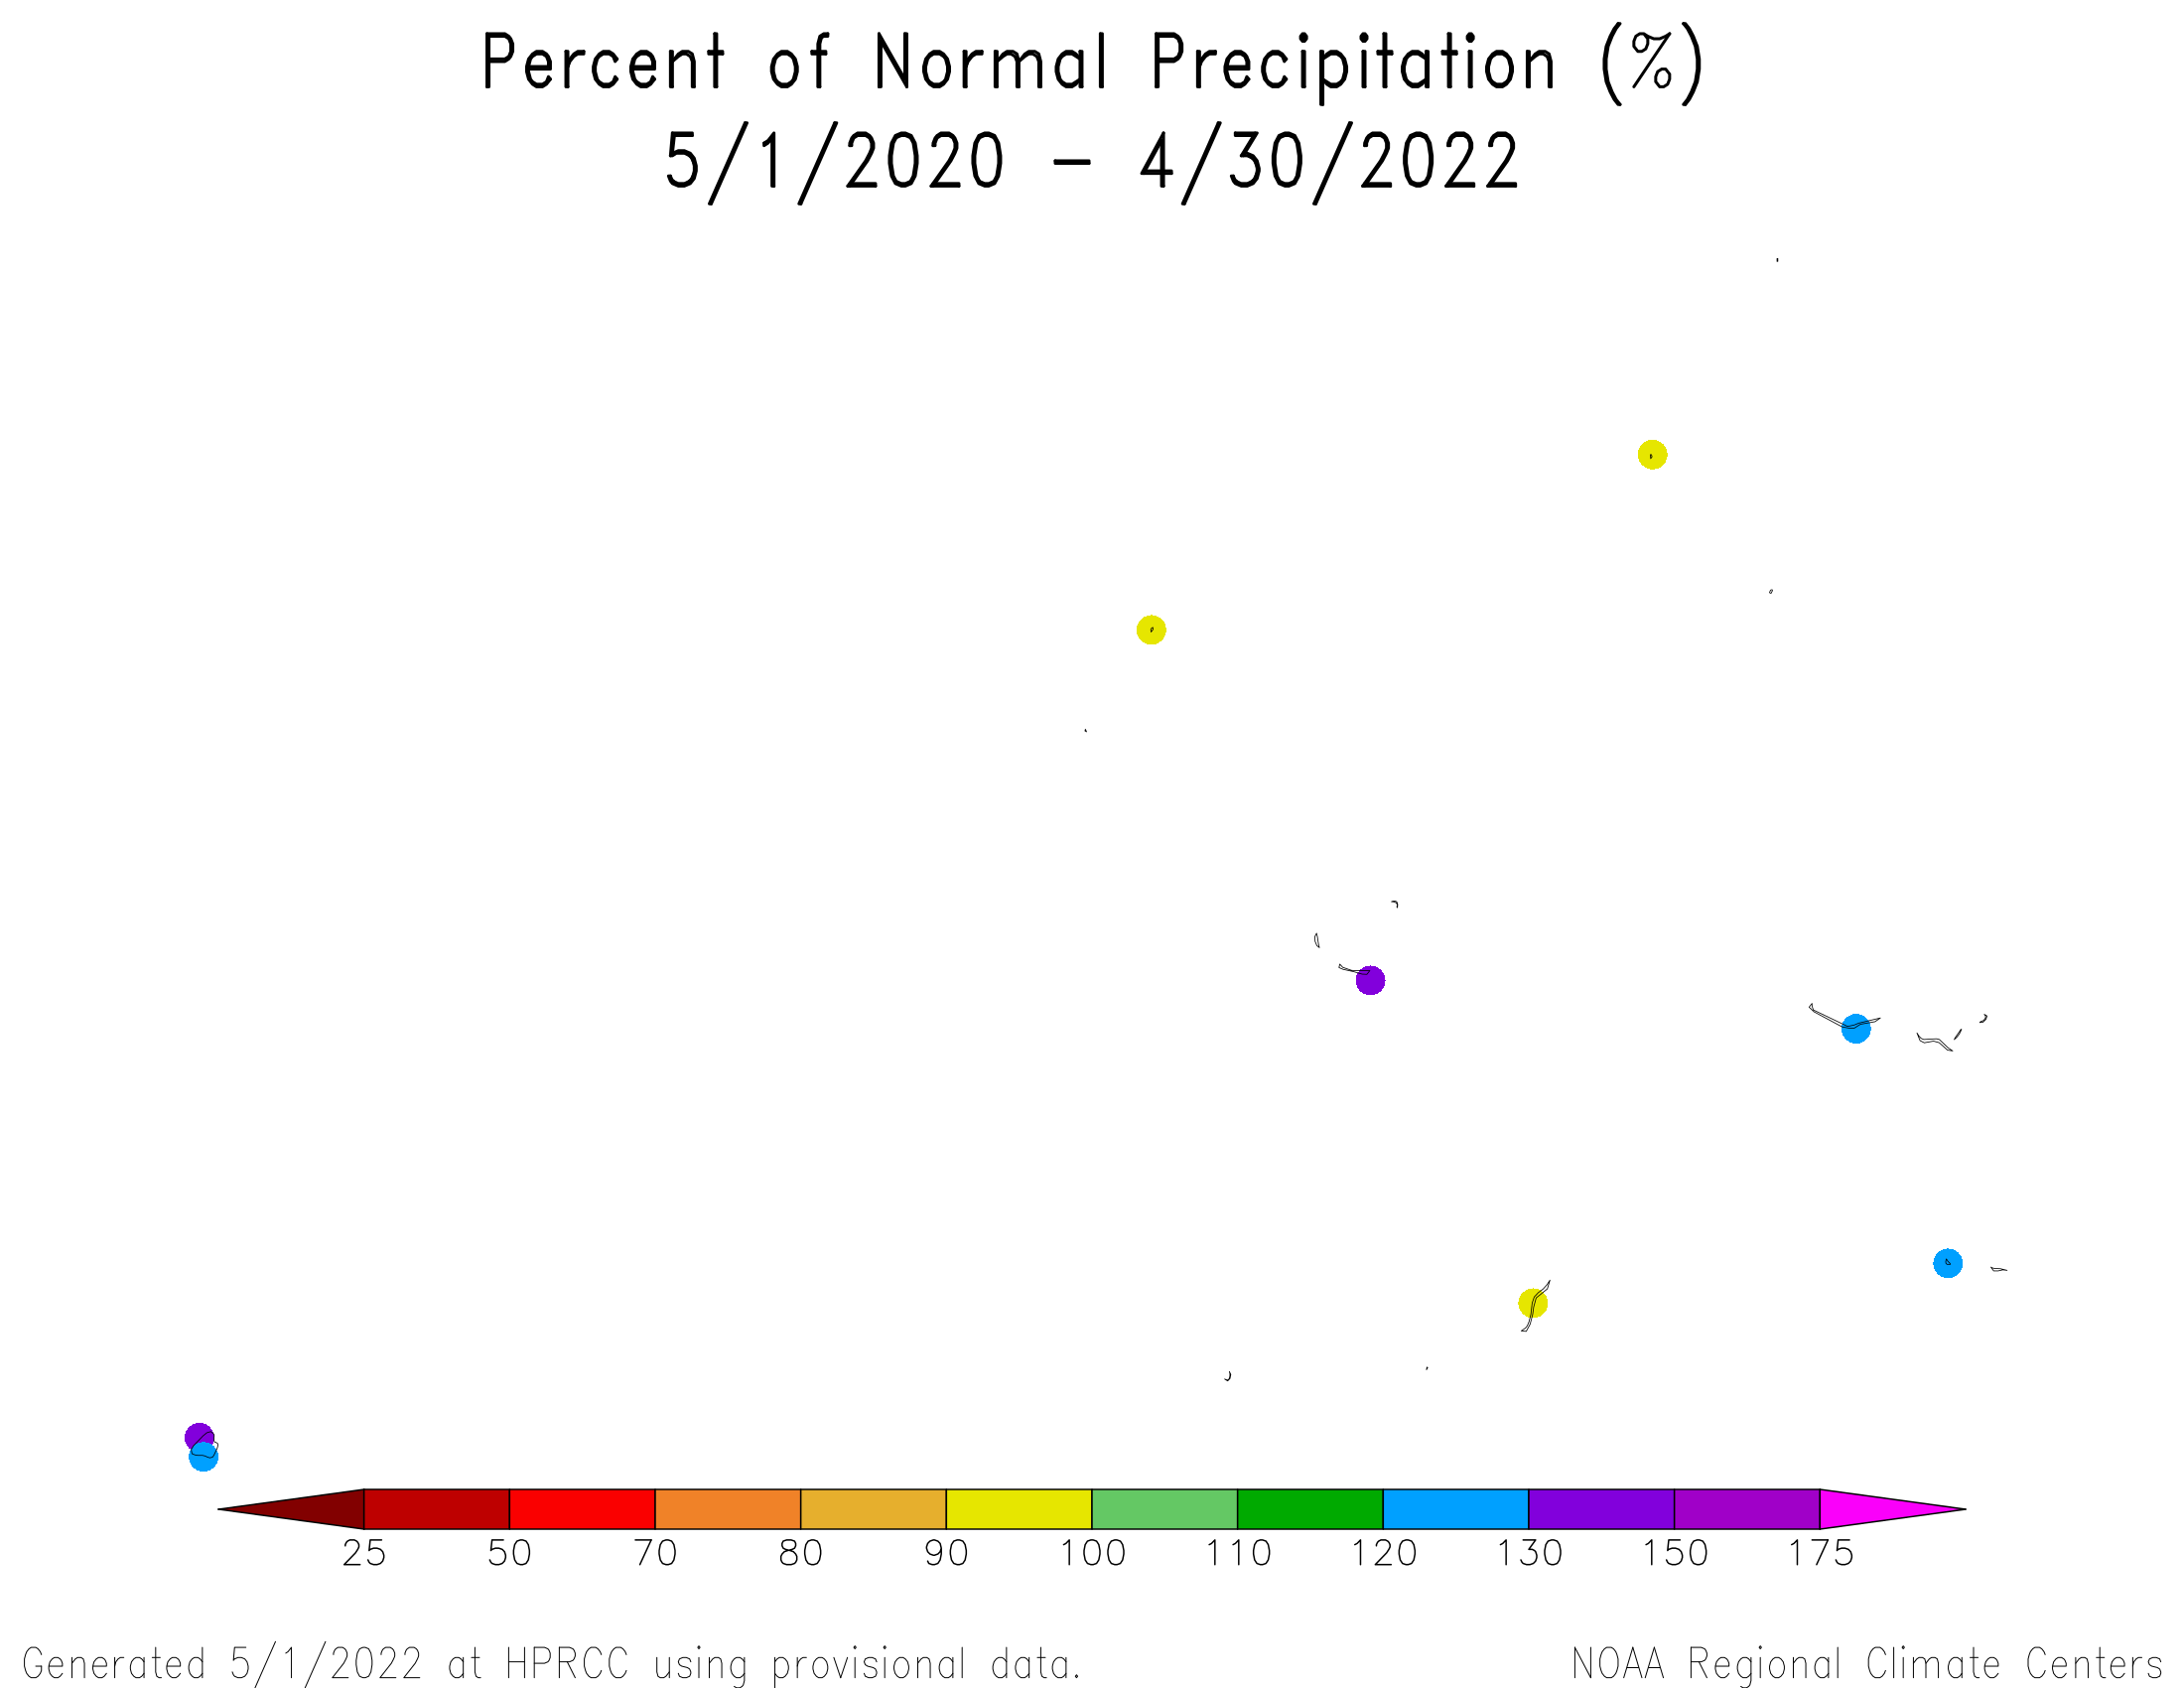 24-month Percent of Normal Precipitation for the Marshall Islands